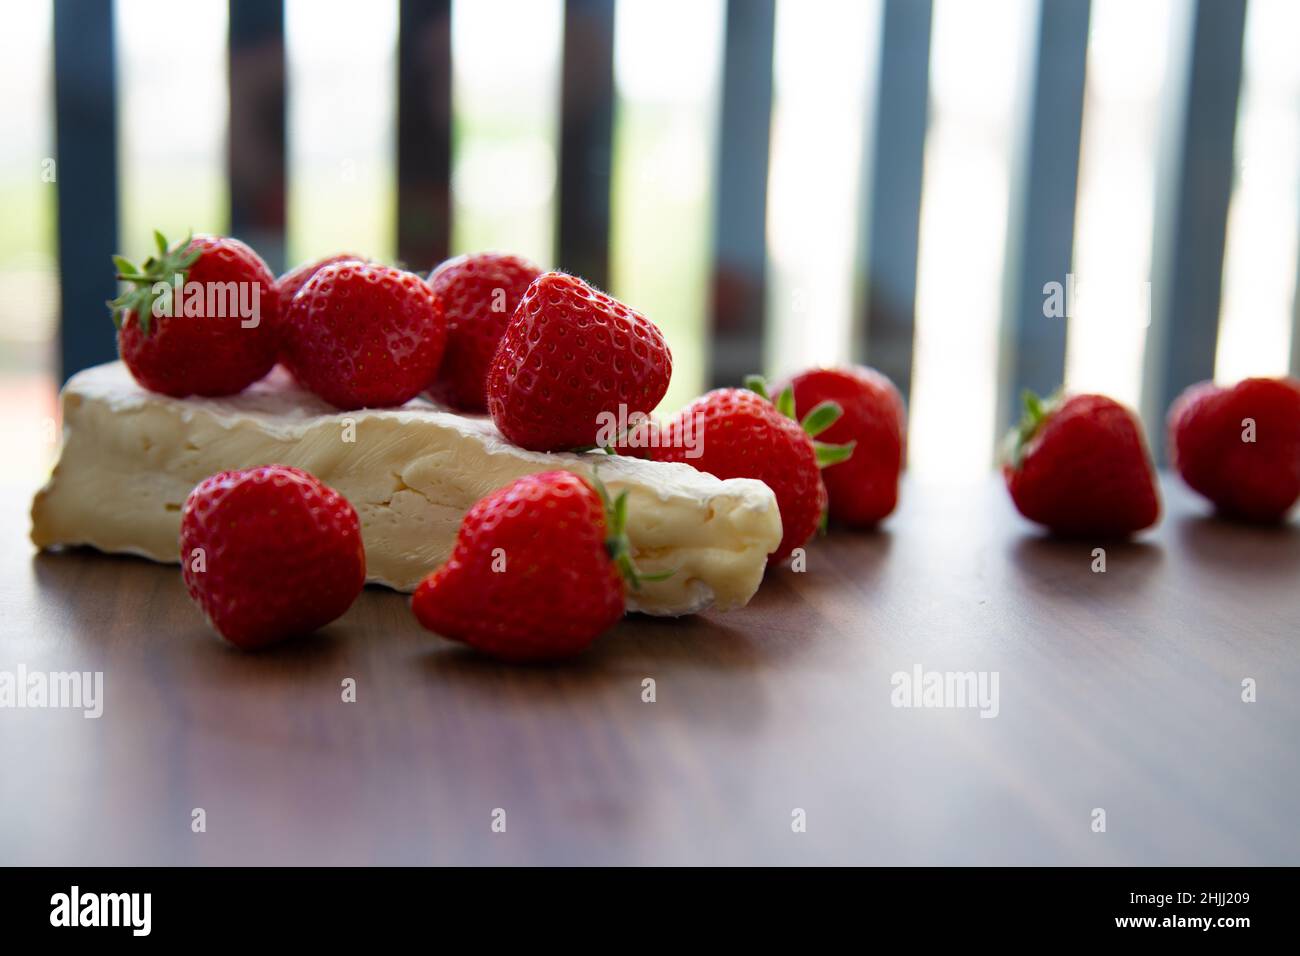 Strawberries accented on the pale backing of a wedghe of brie on a wooden board Stock Photo